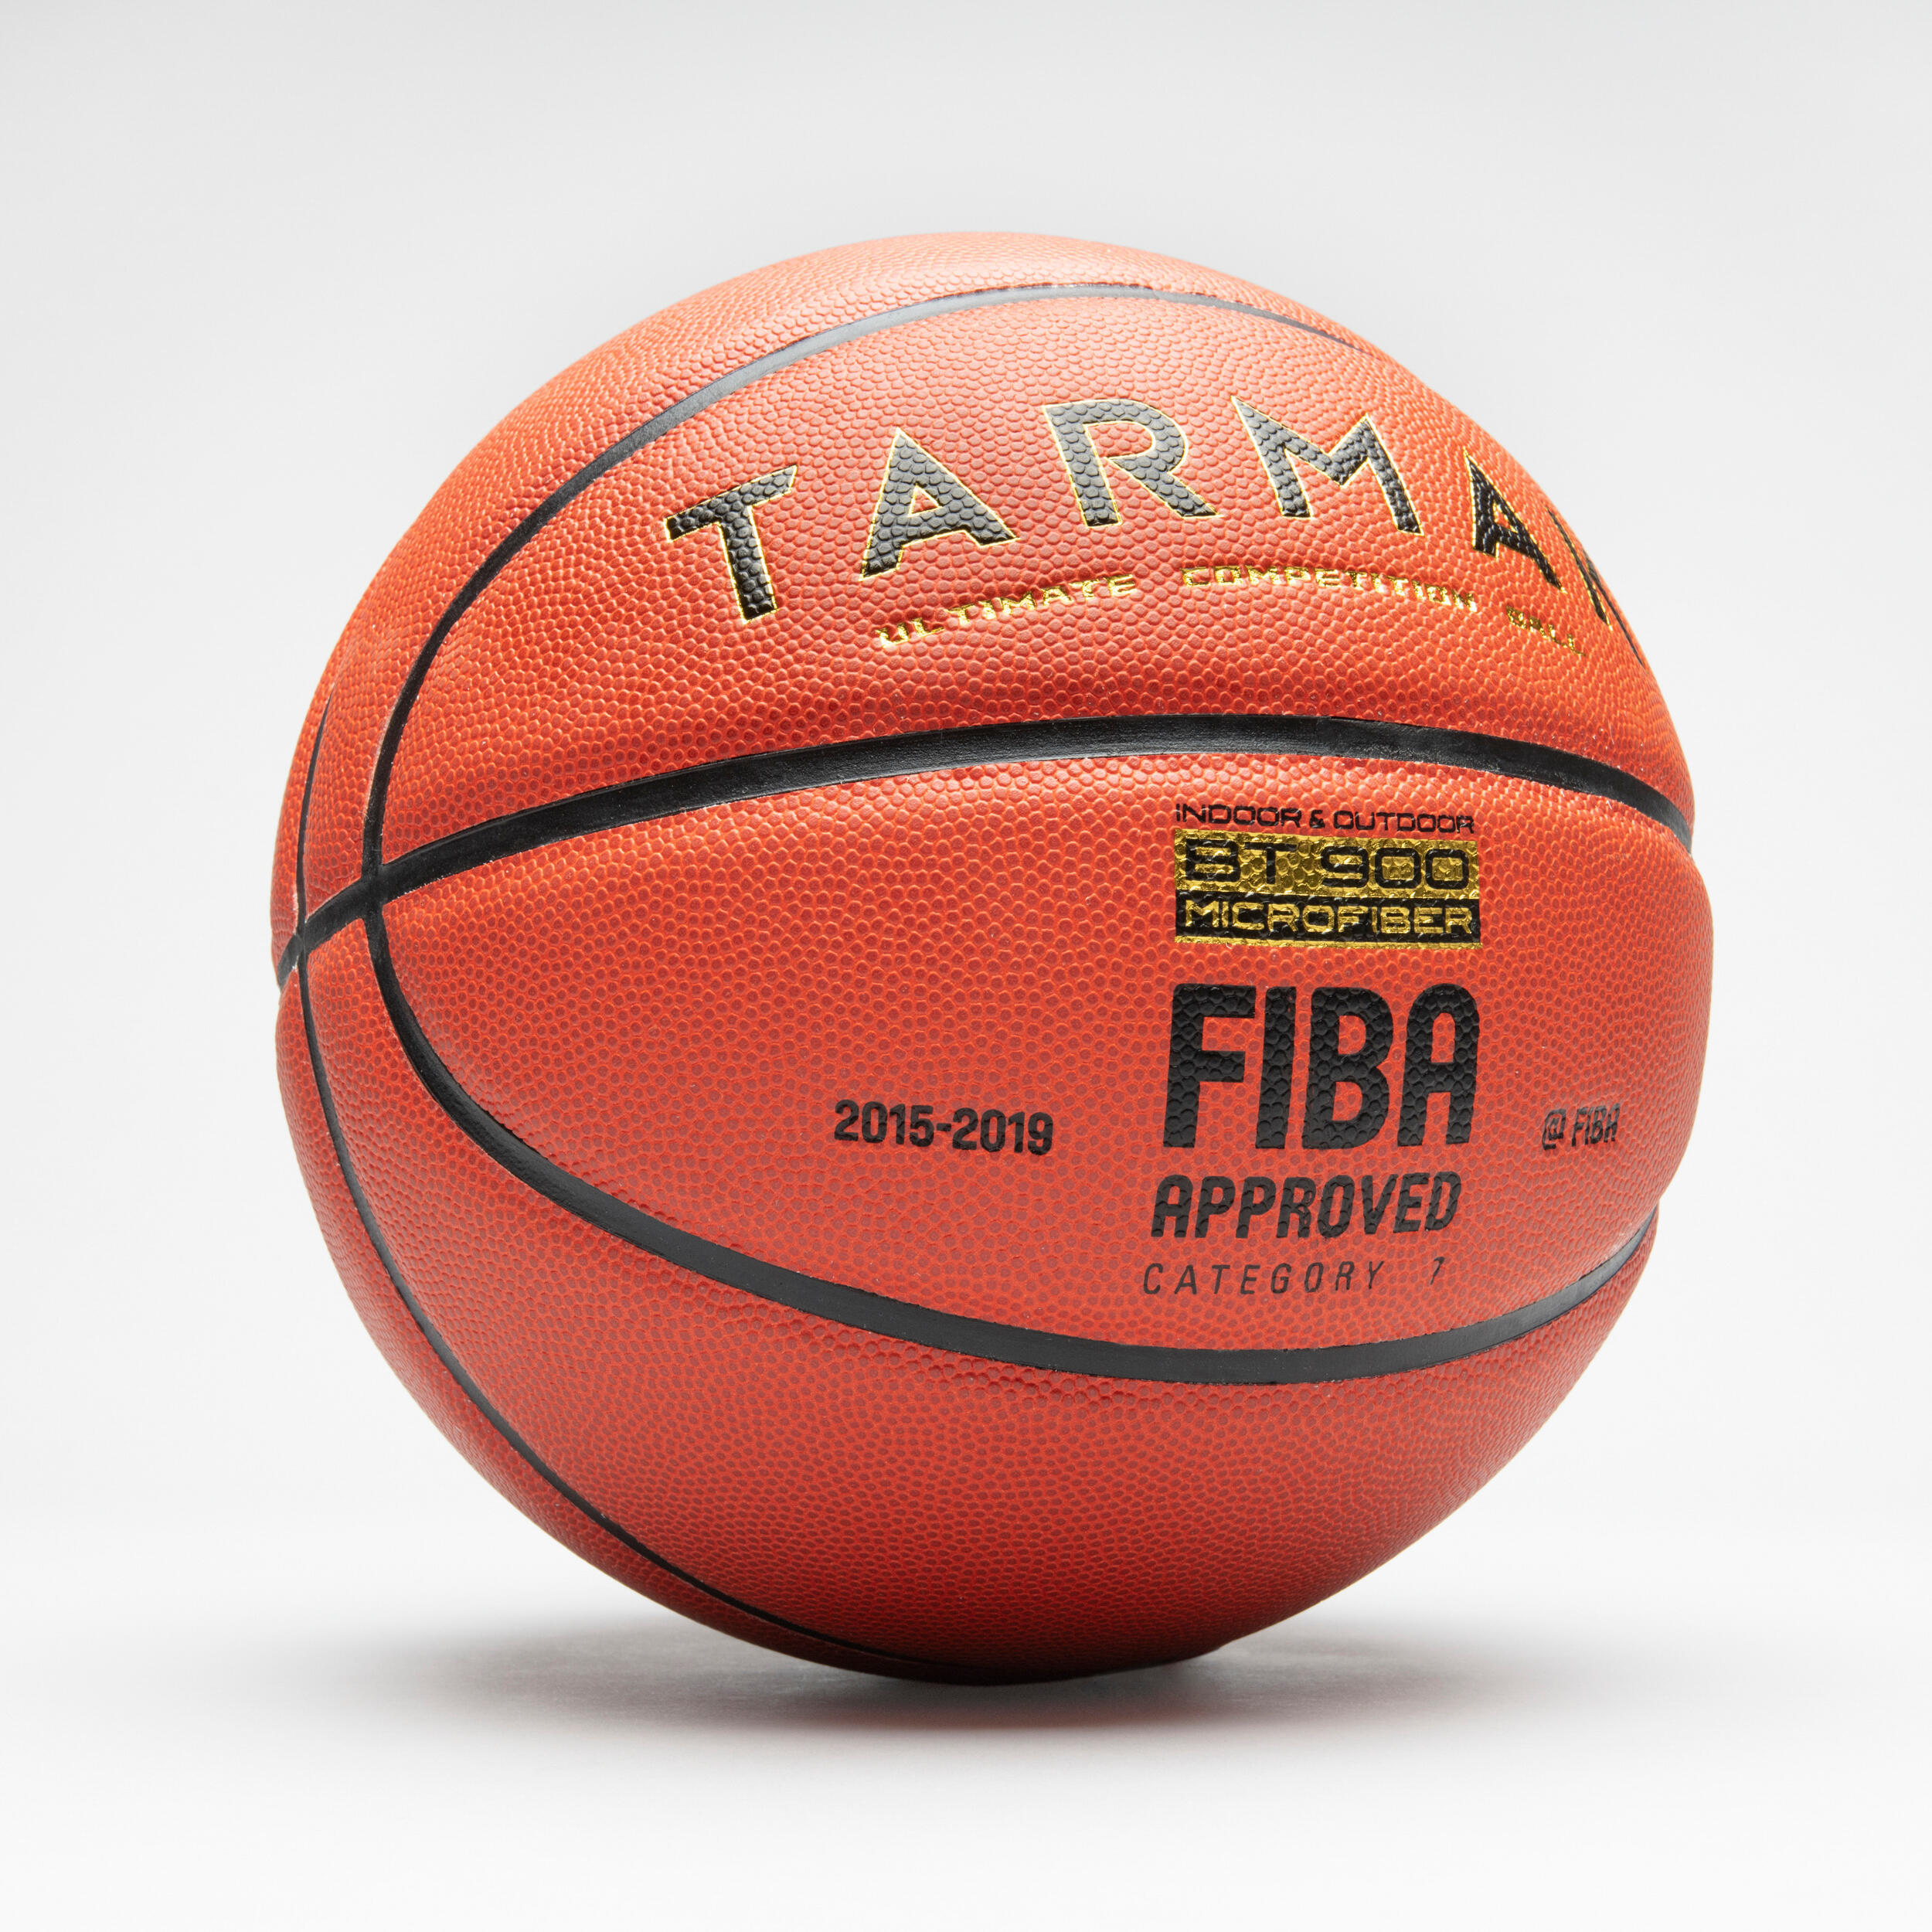 BT900 Size 7 BasketballFIBA-approved for boys and adults 2/7